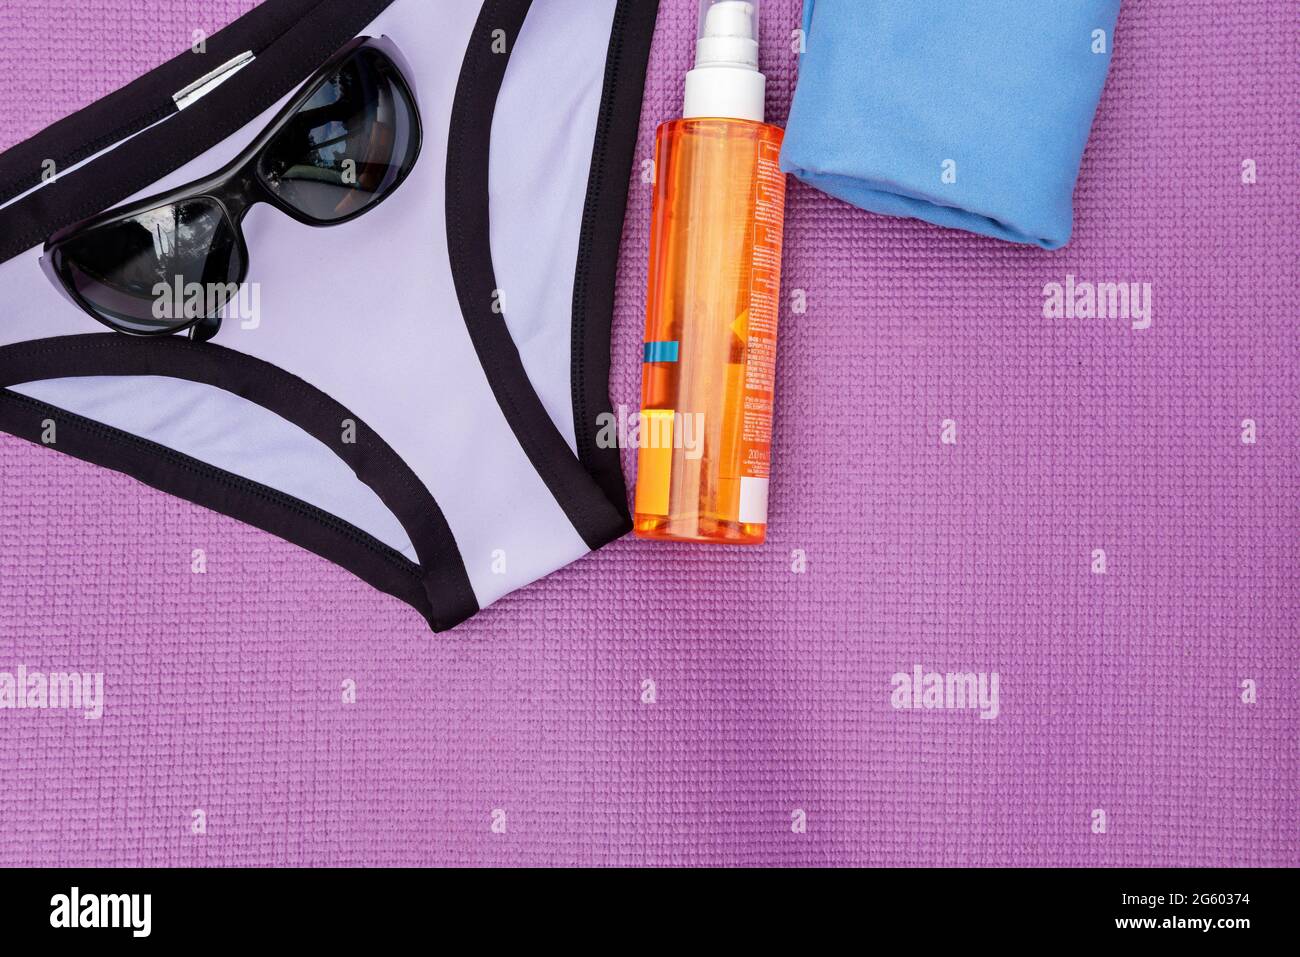 Top view of summer accessories on purple background Stock Photo